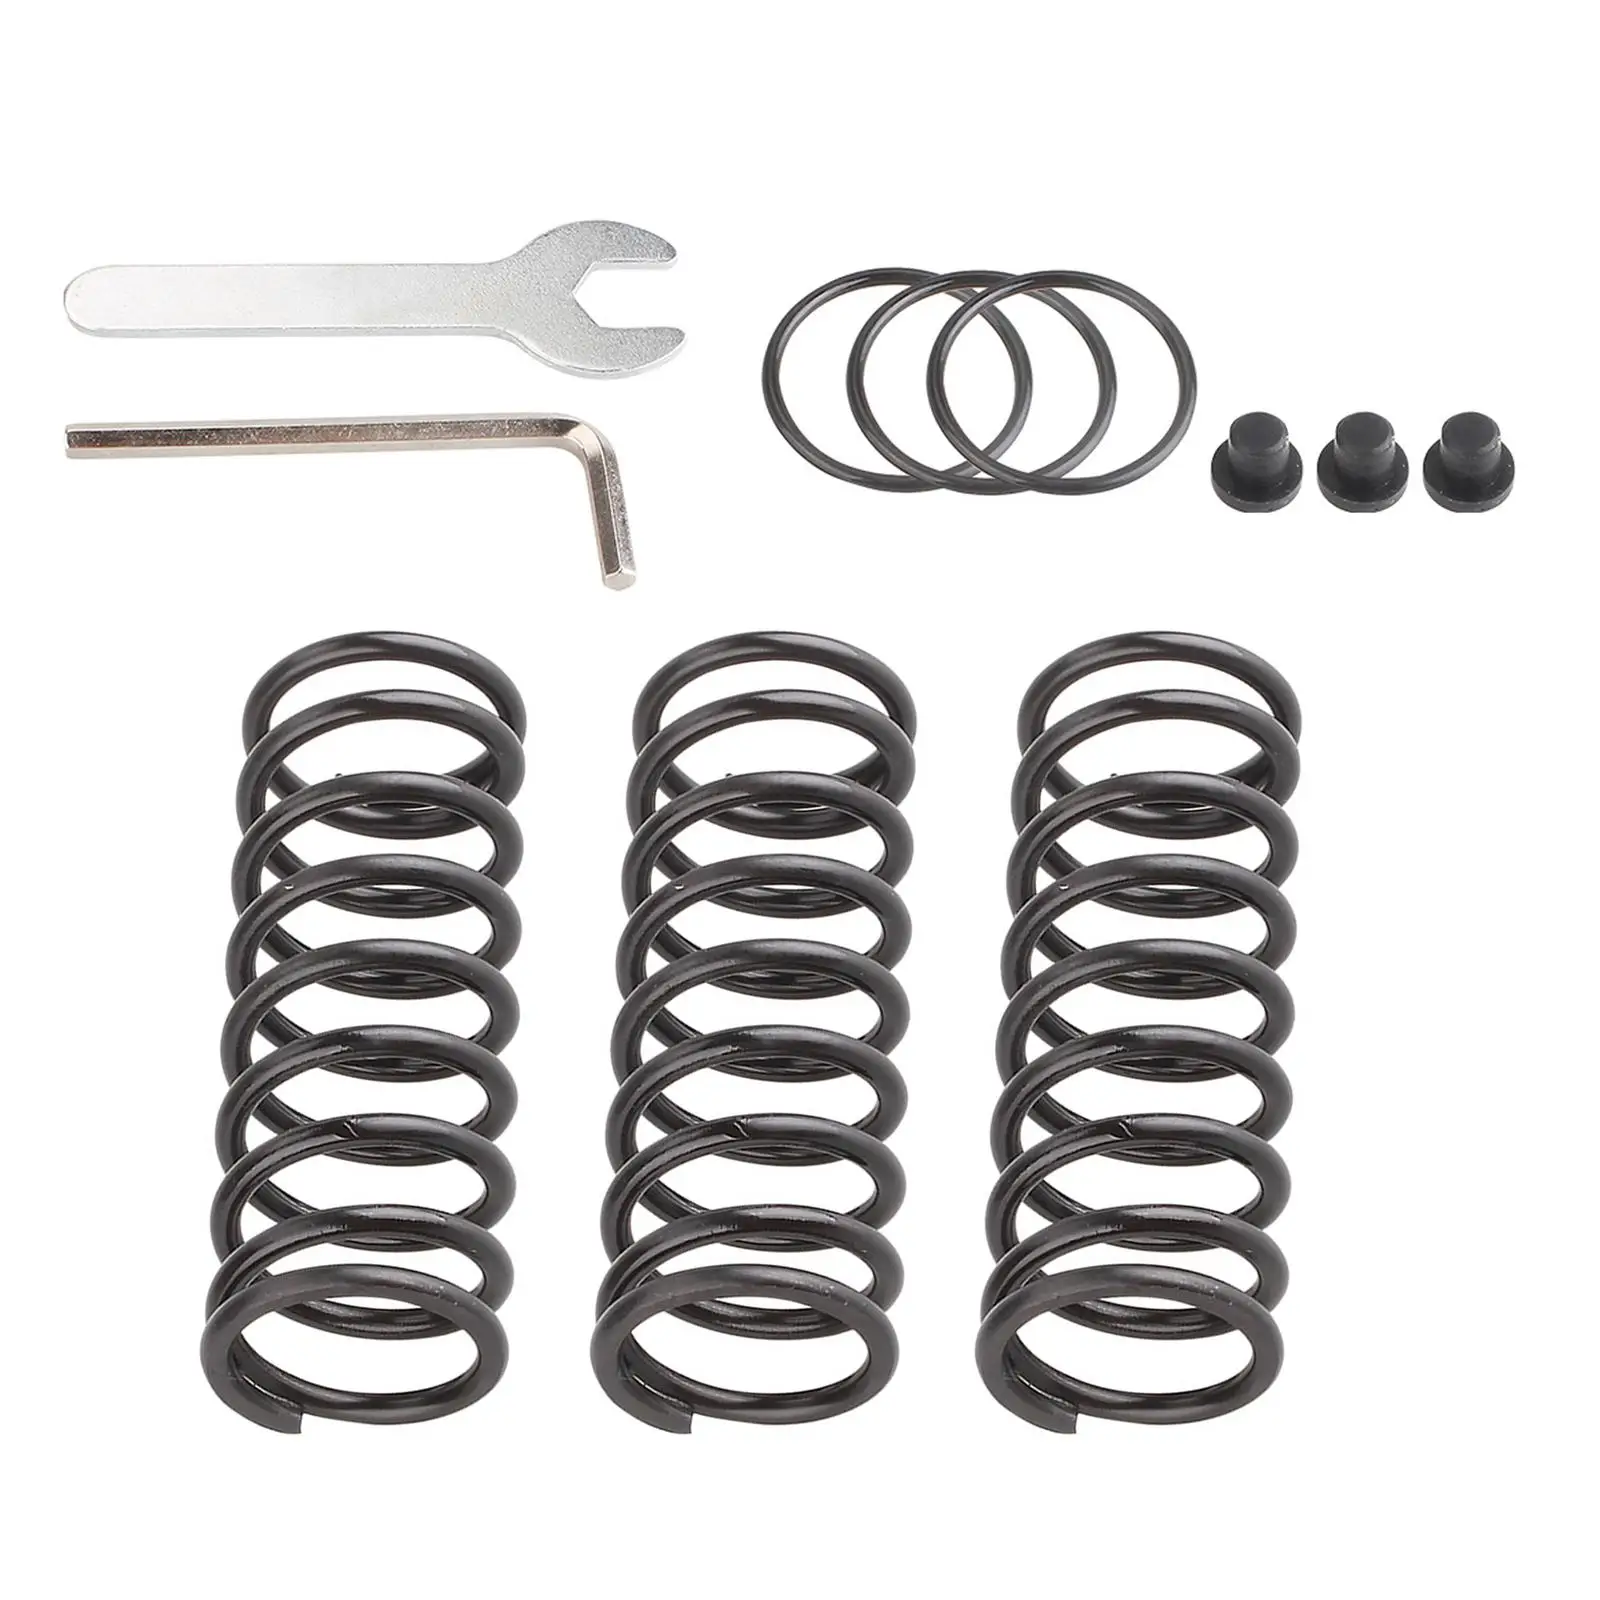 3x Pedal Spring Kit for G27 G29 G920 Accessories for Racing Wheel Easy to Install Professional Durable Throttle Clutch Upgrade